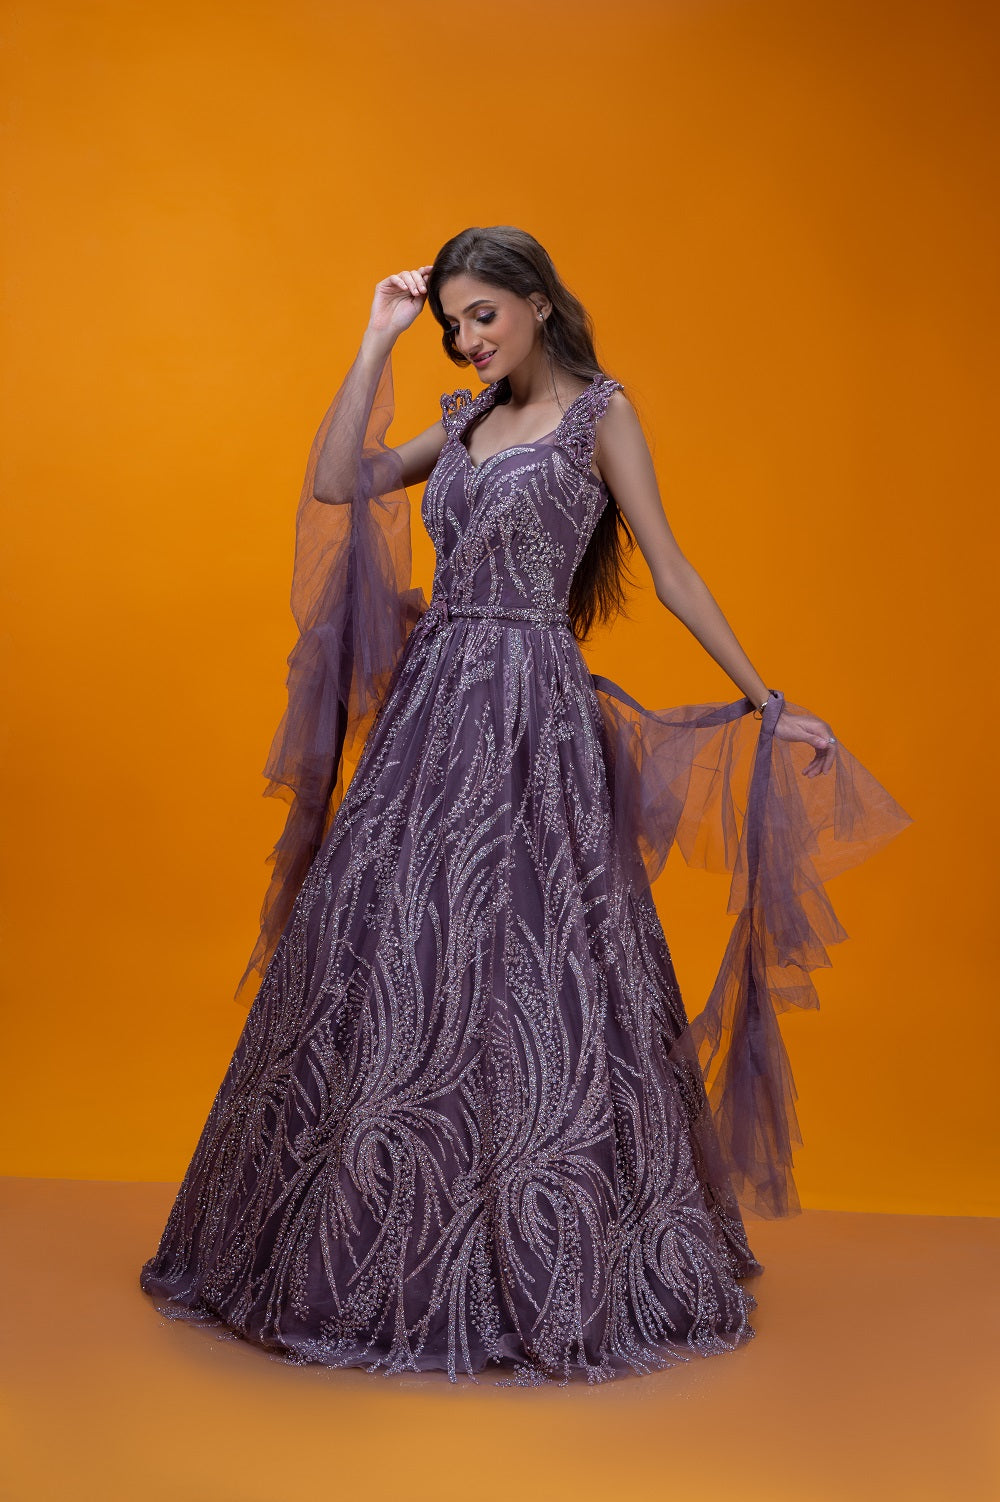 Lavender Satin A-line Beaded Long Prom Dresses MP700 | Musebridals